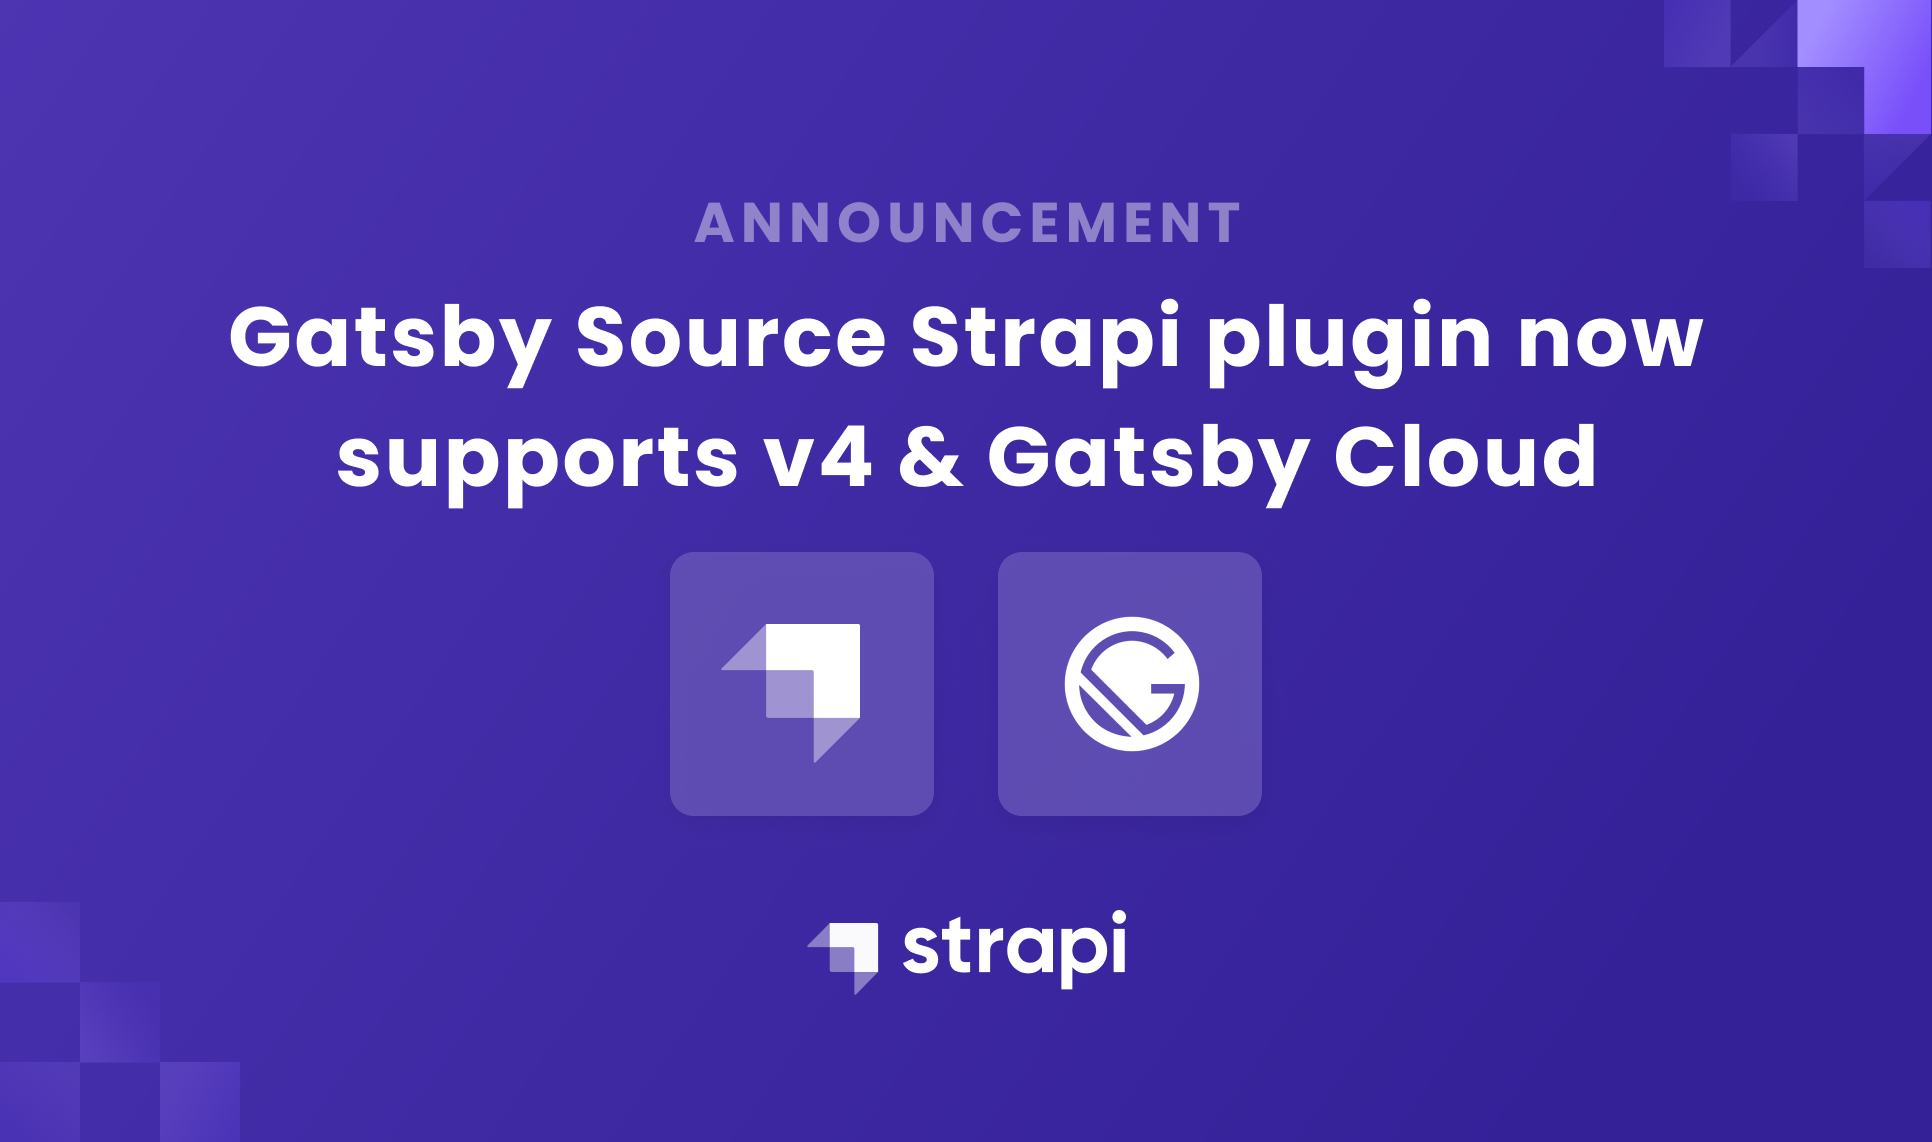 Gatsby source Strapi plugin supports v4 and Gatsby Cloud